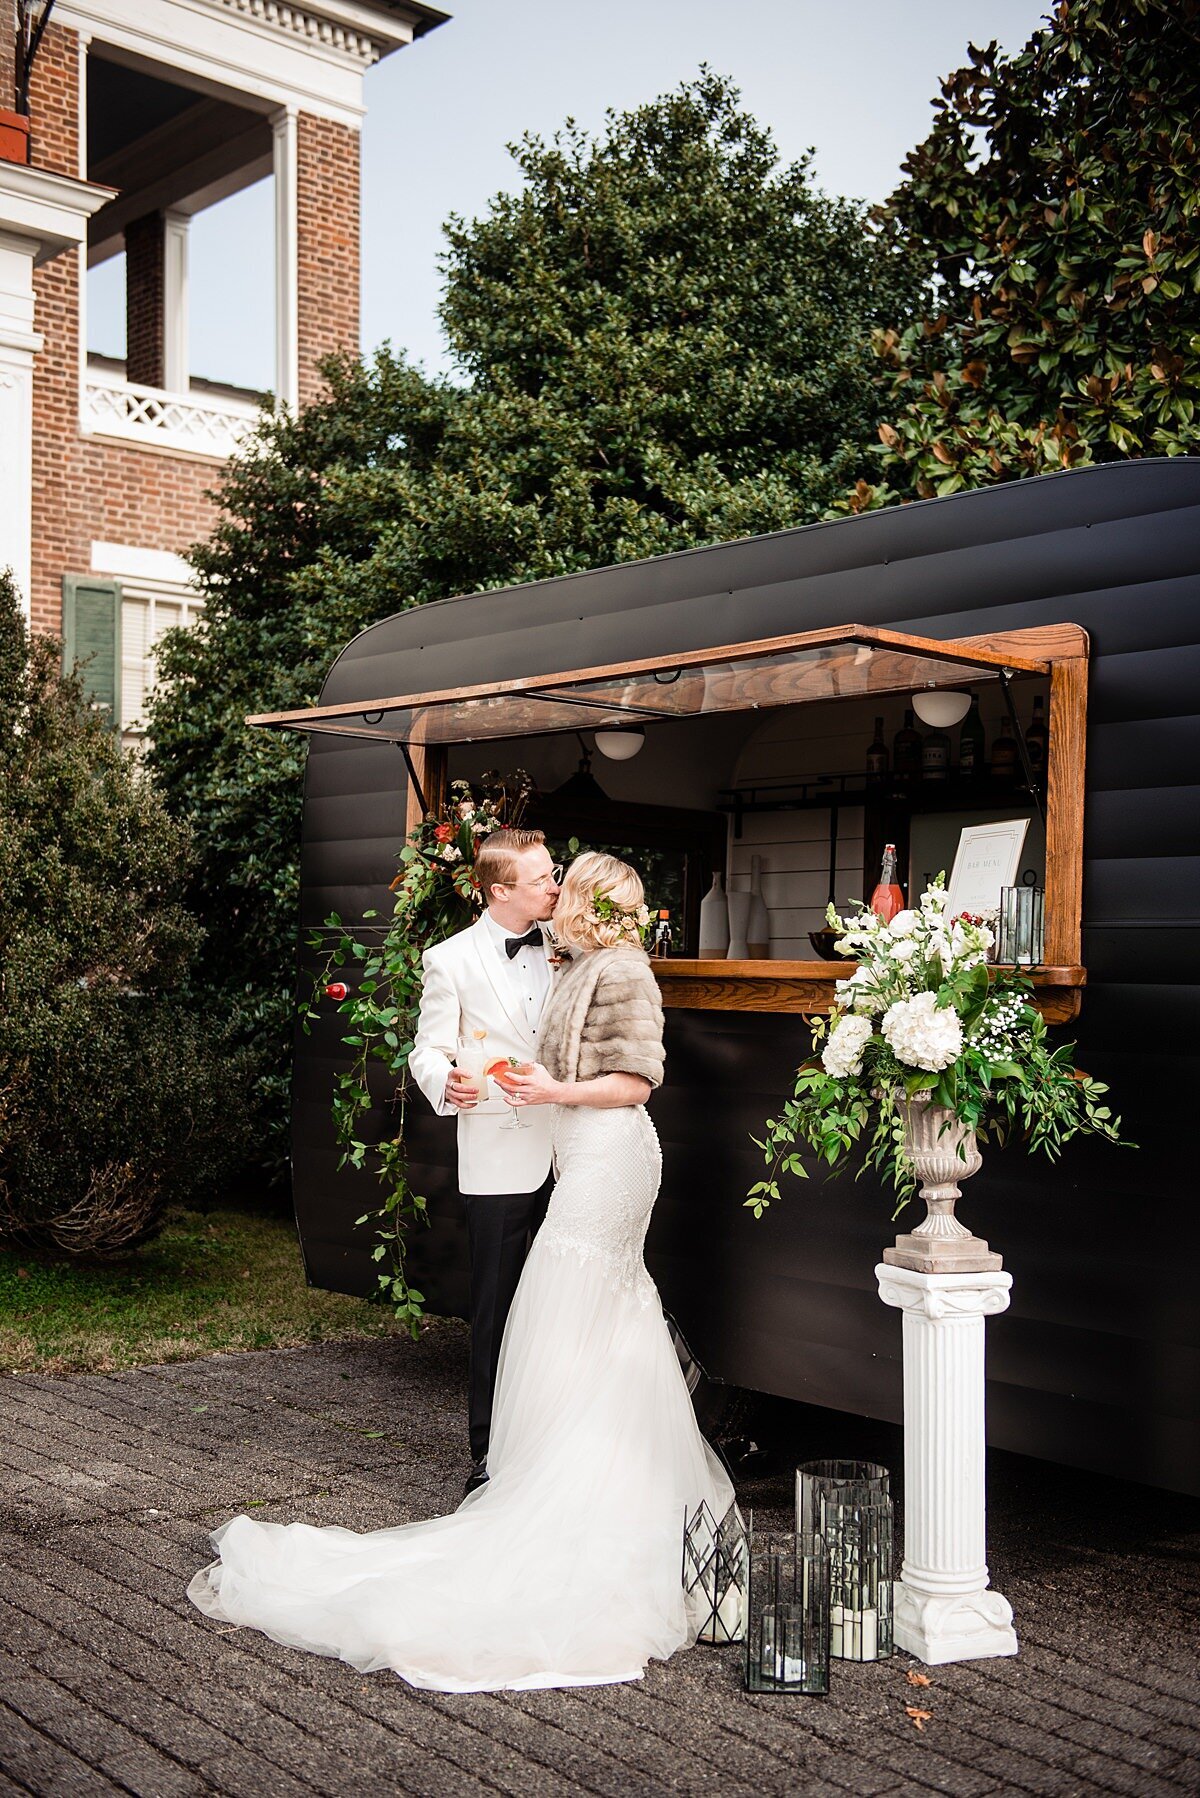 A groom in a tuxedo with a white jacket kisses the bride in front of a black bar trailer. The bride has a gown with a long train with a fur wrap. They are holding signature cocktails next to a white pillar holding a stone planter with a large floral arrangemement with white flowers  and cascading greenery at Rippa Villa.